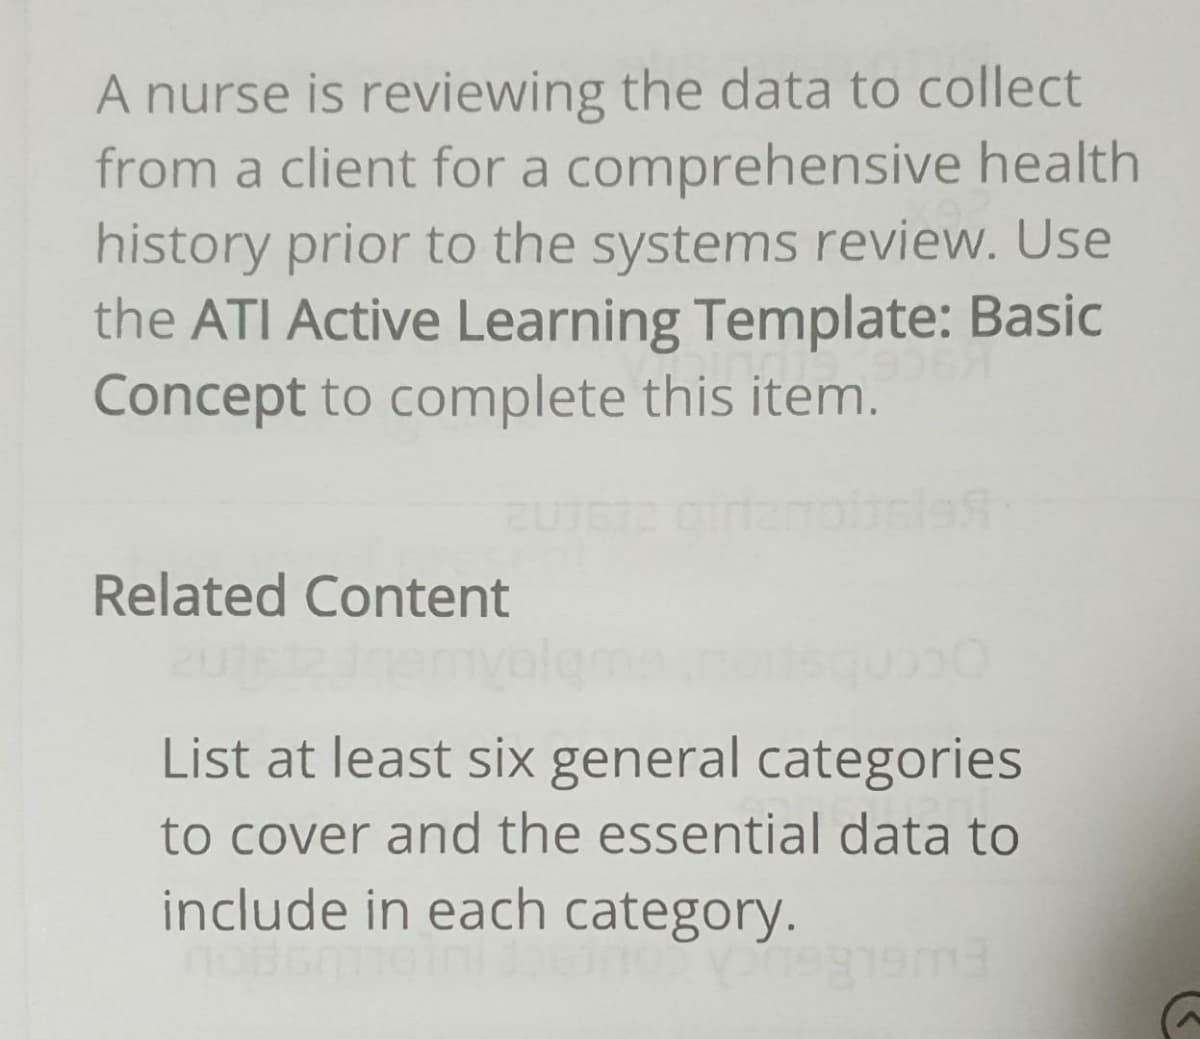 A nurse is reviewing the data to collect
from a client for a comprehensive health
history prior to the systems review. Use
the ATI Active Learning Template: Basic
Concept to complete this item.
Related Content
List at least six general categories
to cover and the essential data to
include in each category.
ema
